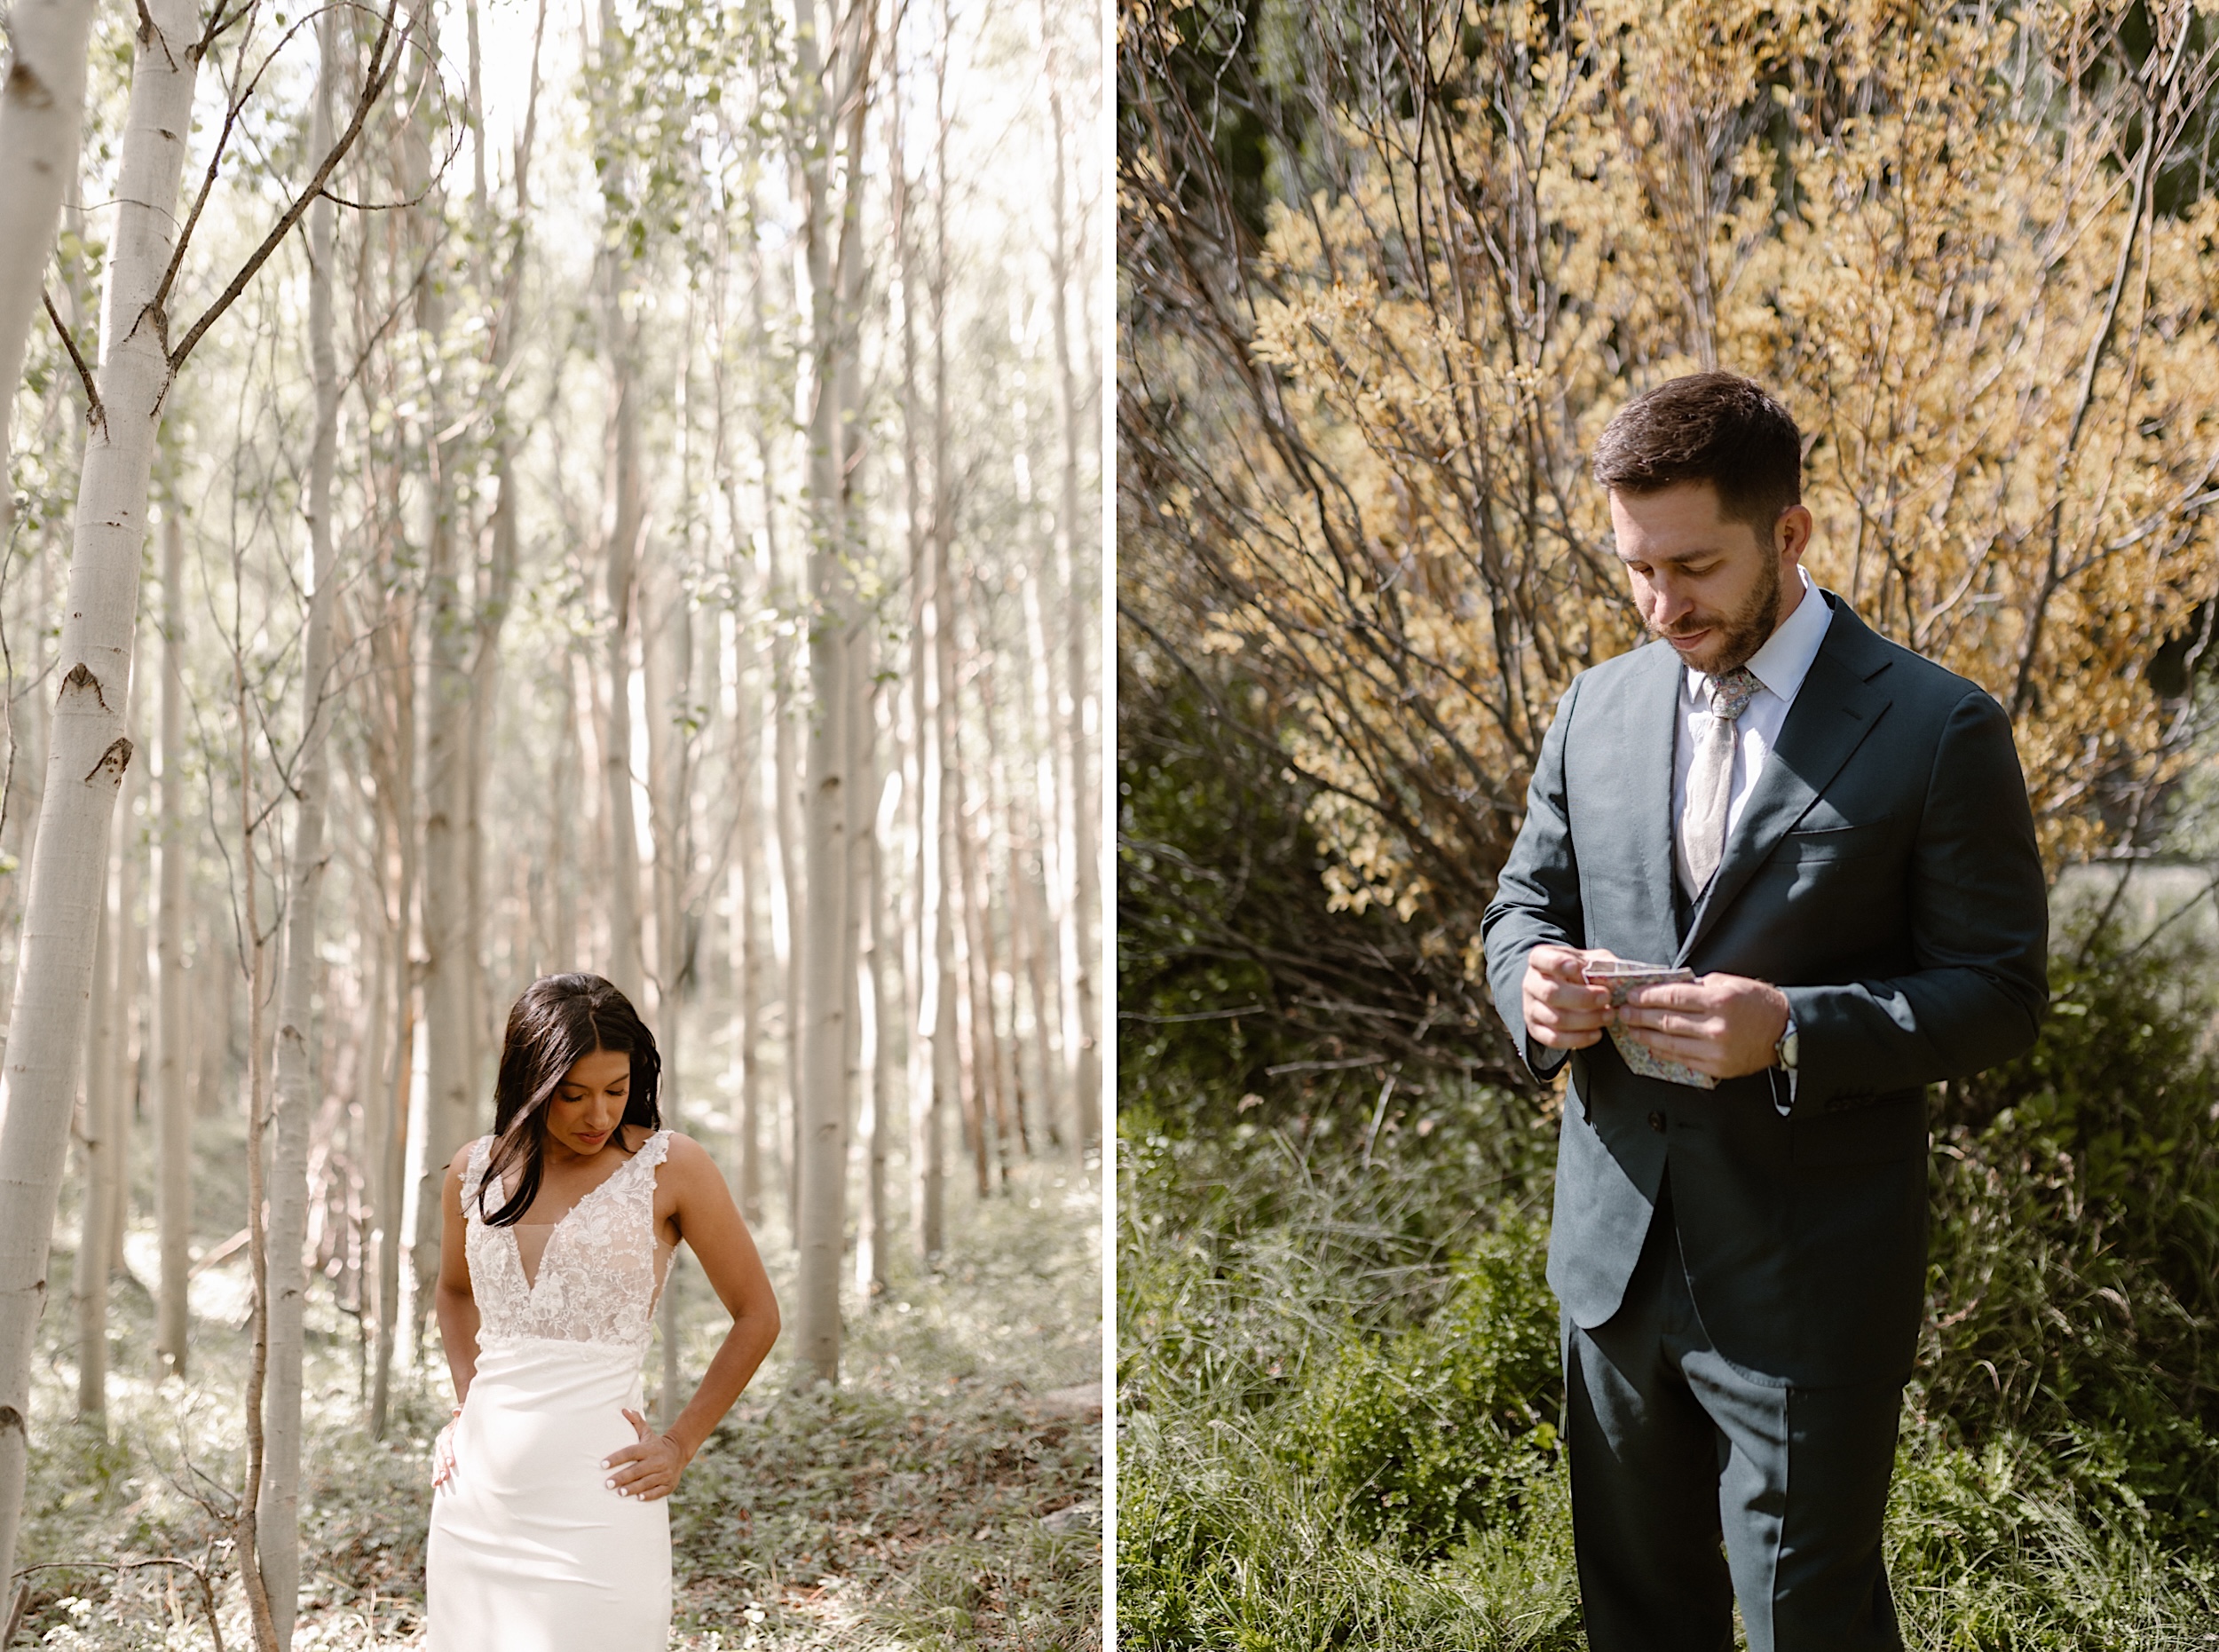 Monia & Kyle held a romantic and intimate Ouray elopement with their two dogs on a sunny autumn day. Photos by Colorado wedding photographer, Ashley Joyce.